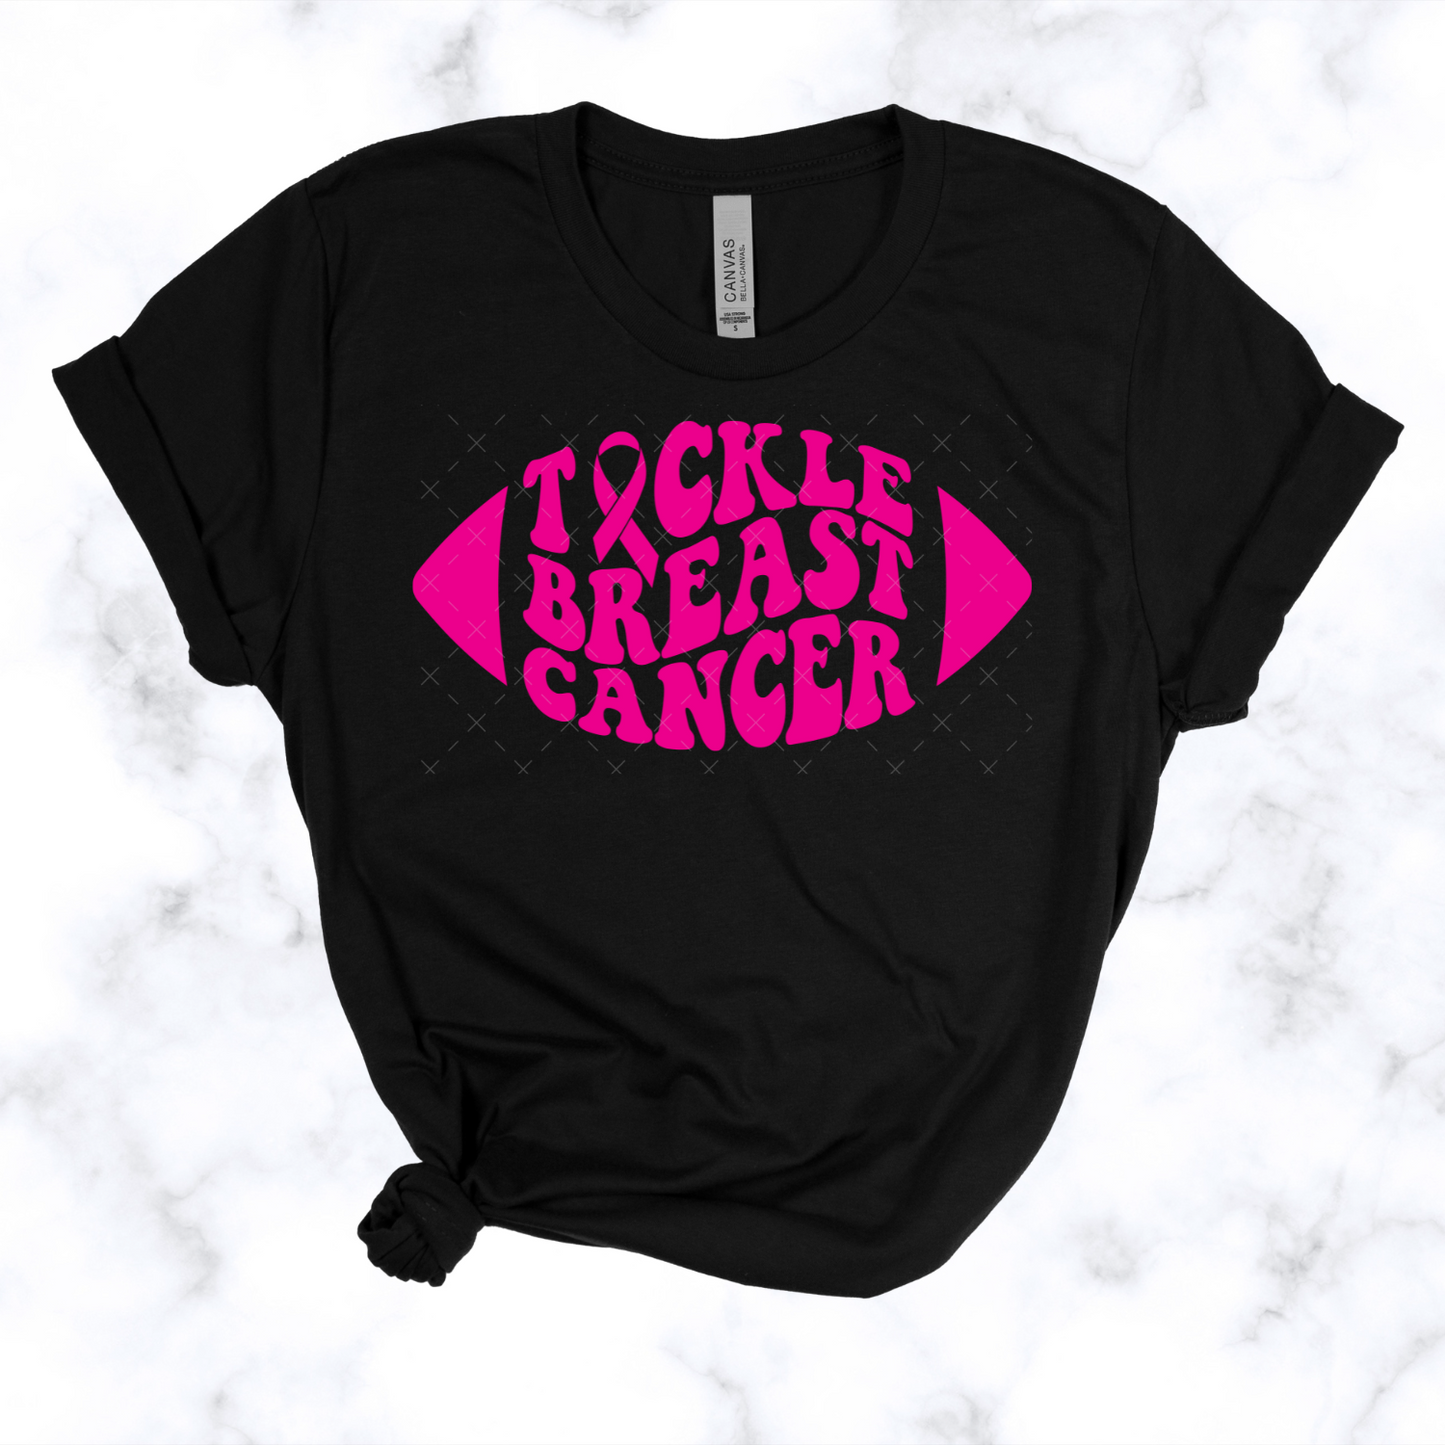 Tackle Breast Cancer Football Tee Youth